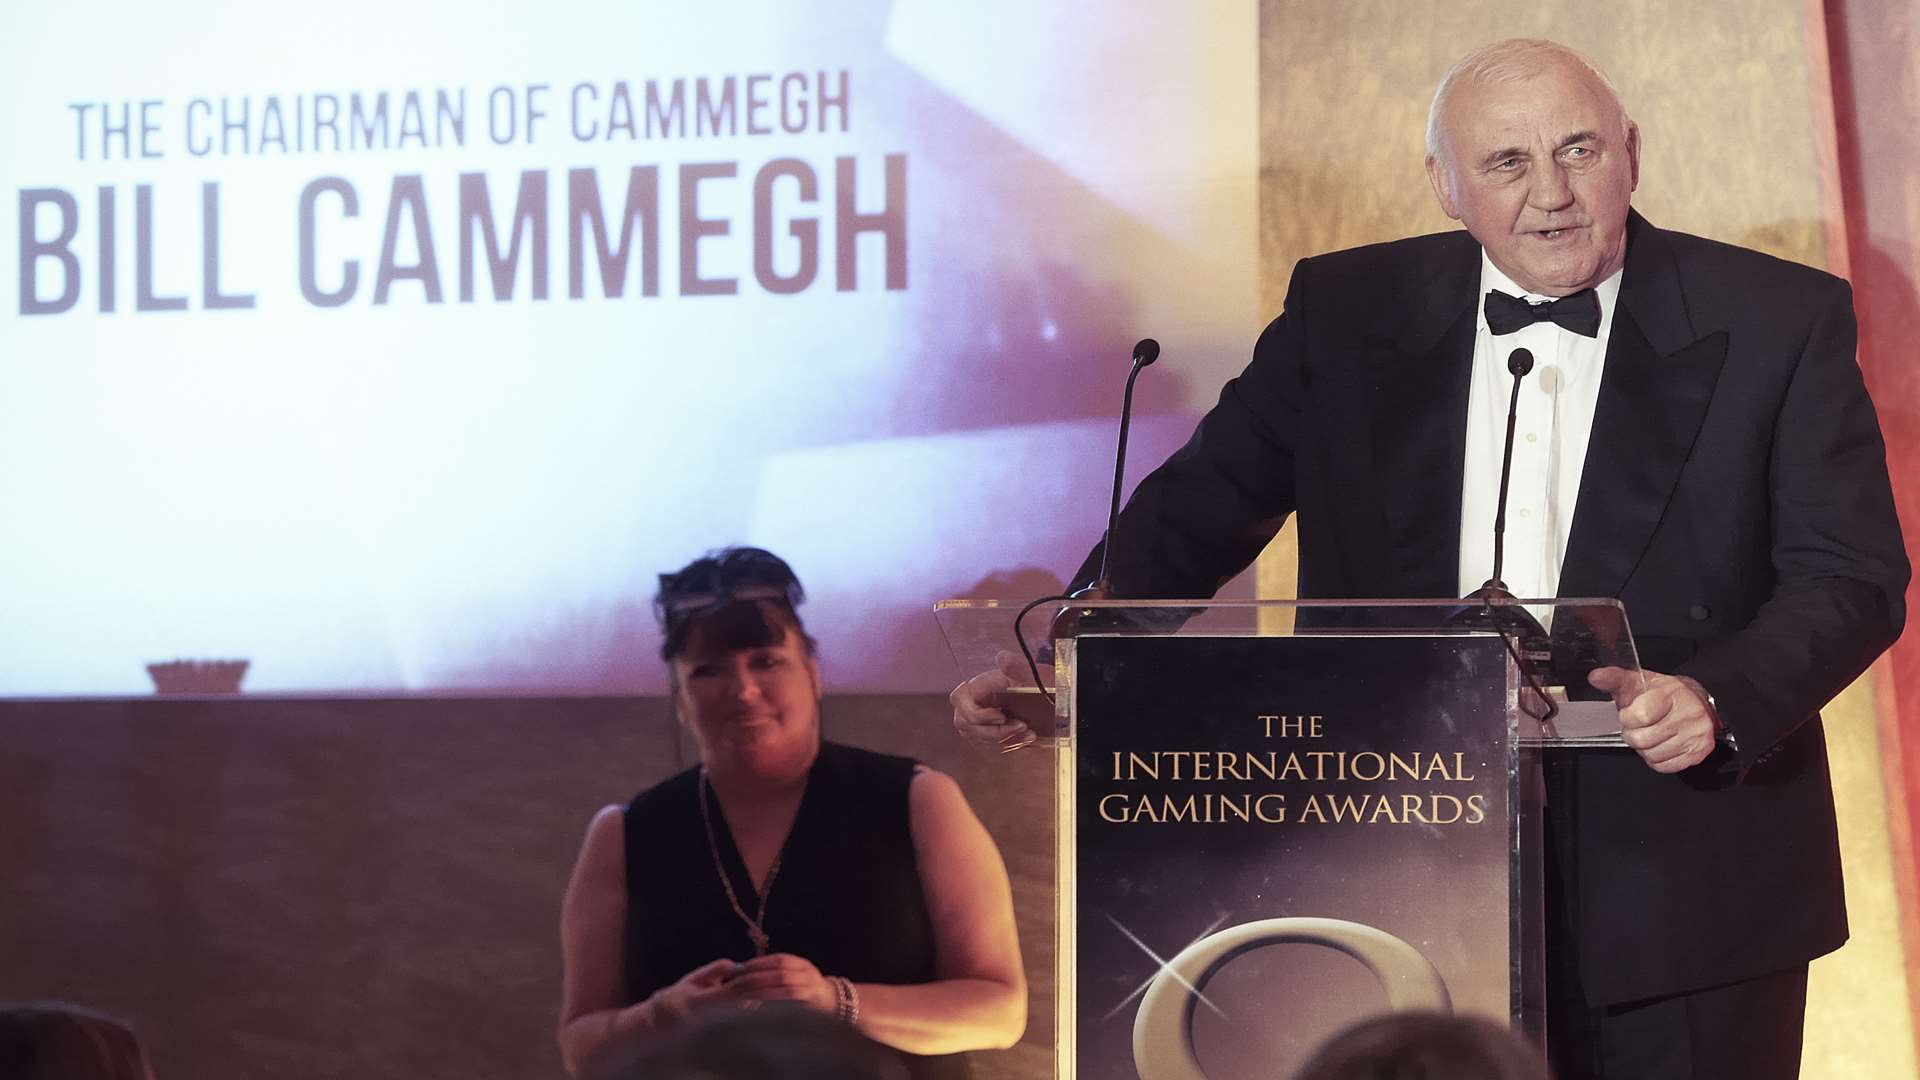 Bill Cammegh was given the Outstanding Contribution Award at this year's International Gaming Awards